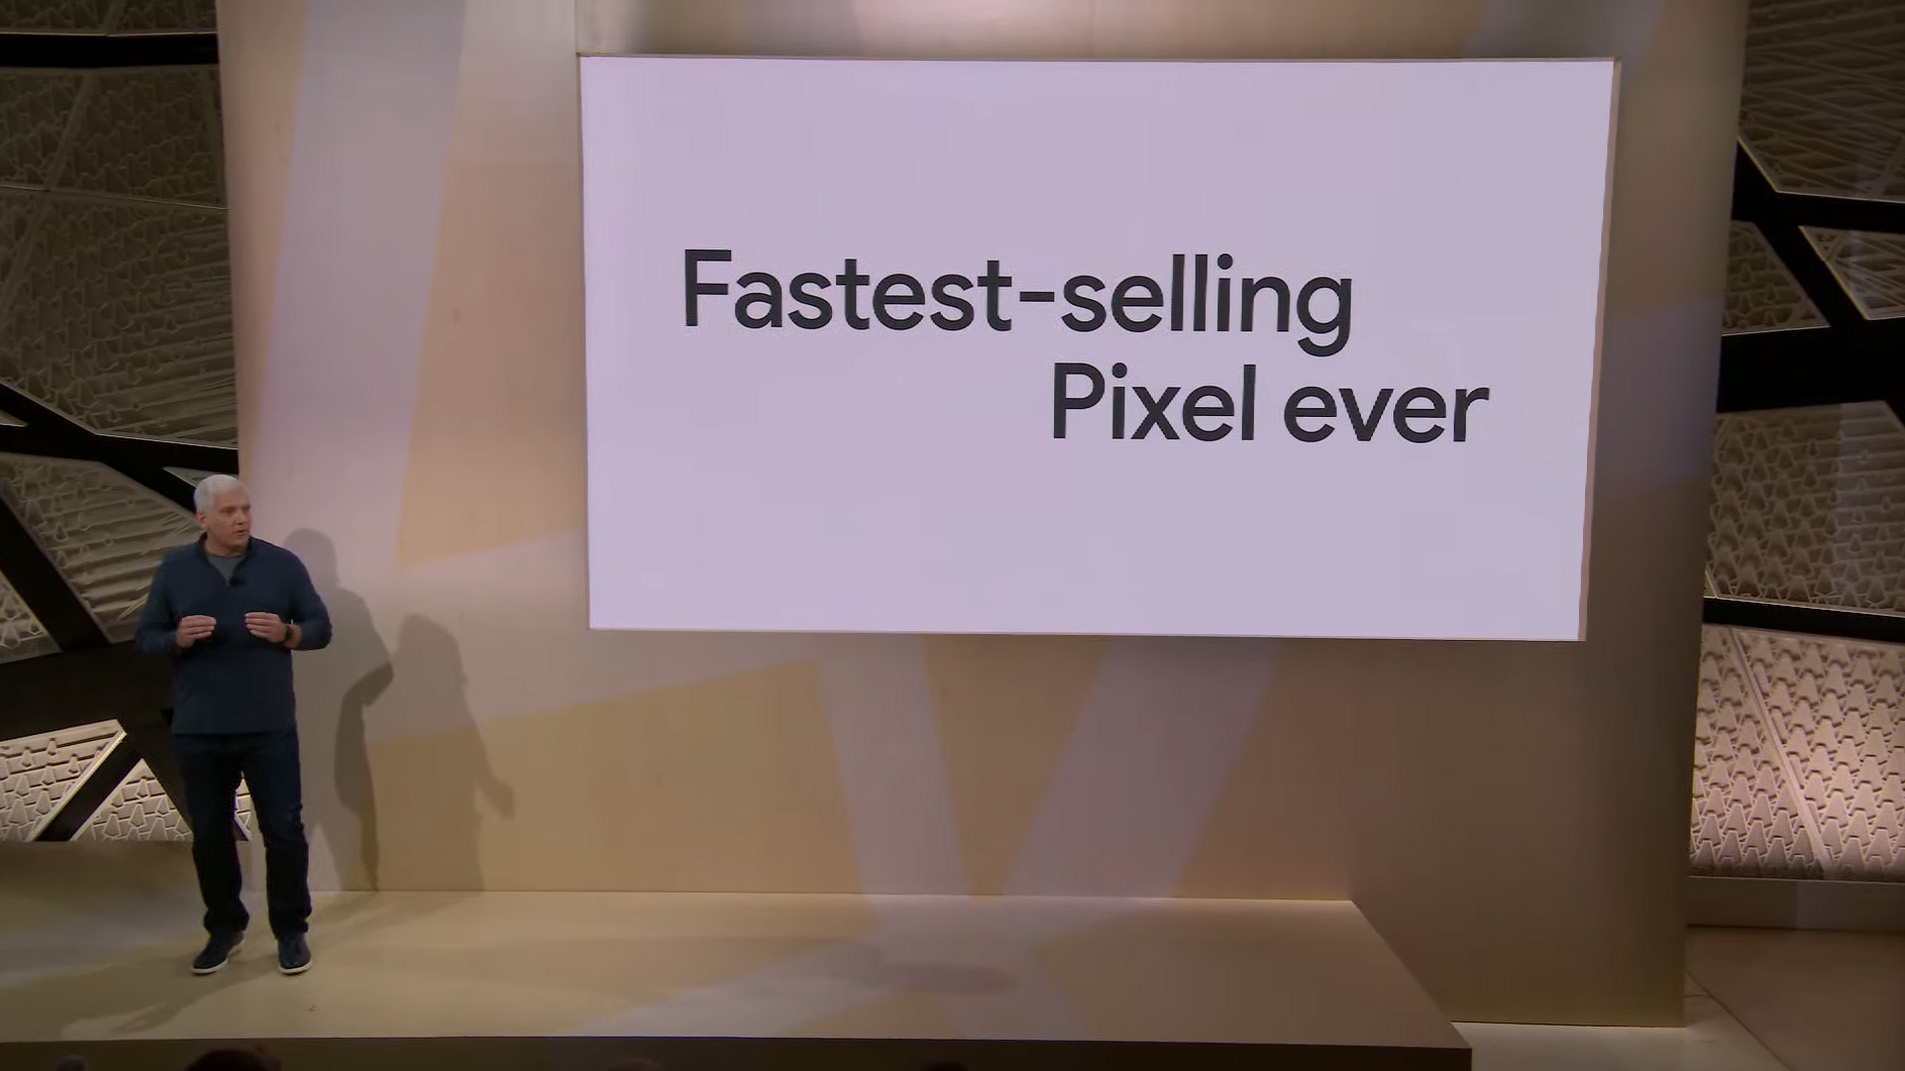 Pixel 6a sales announcement at Google Fall 2022 event